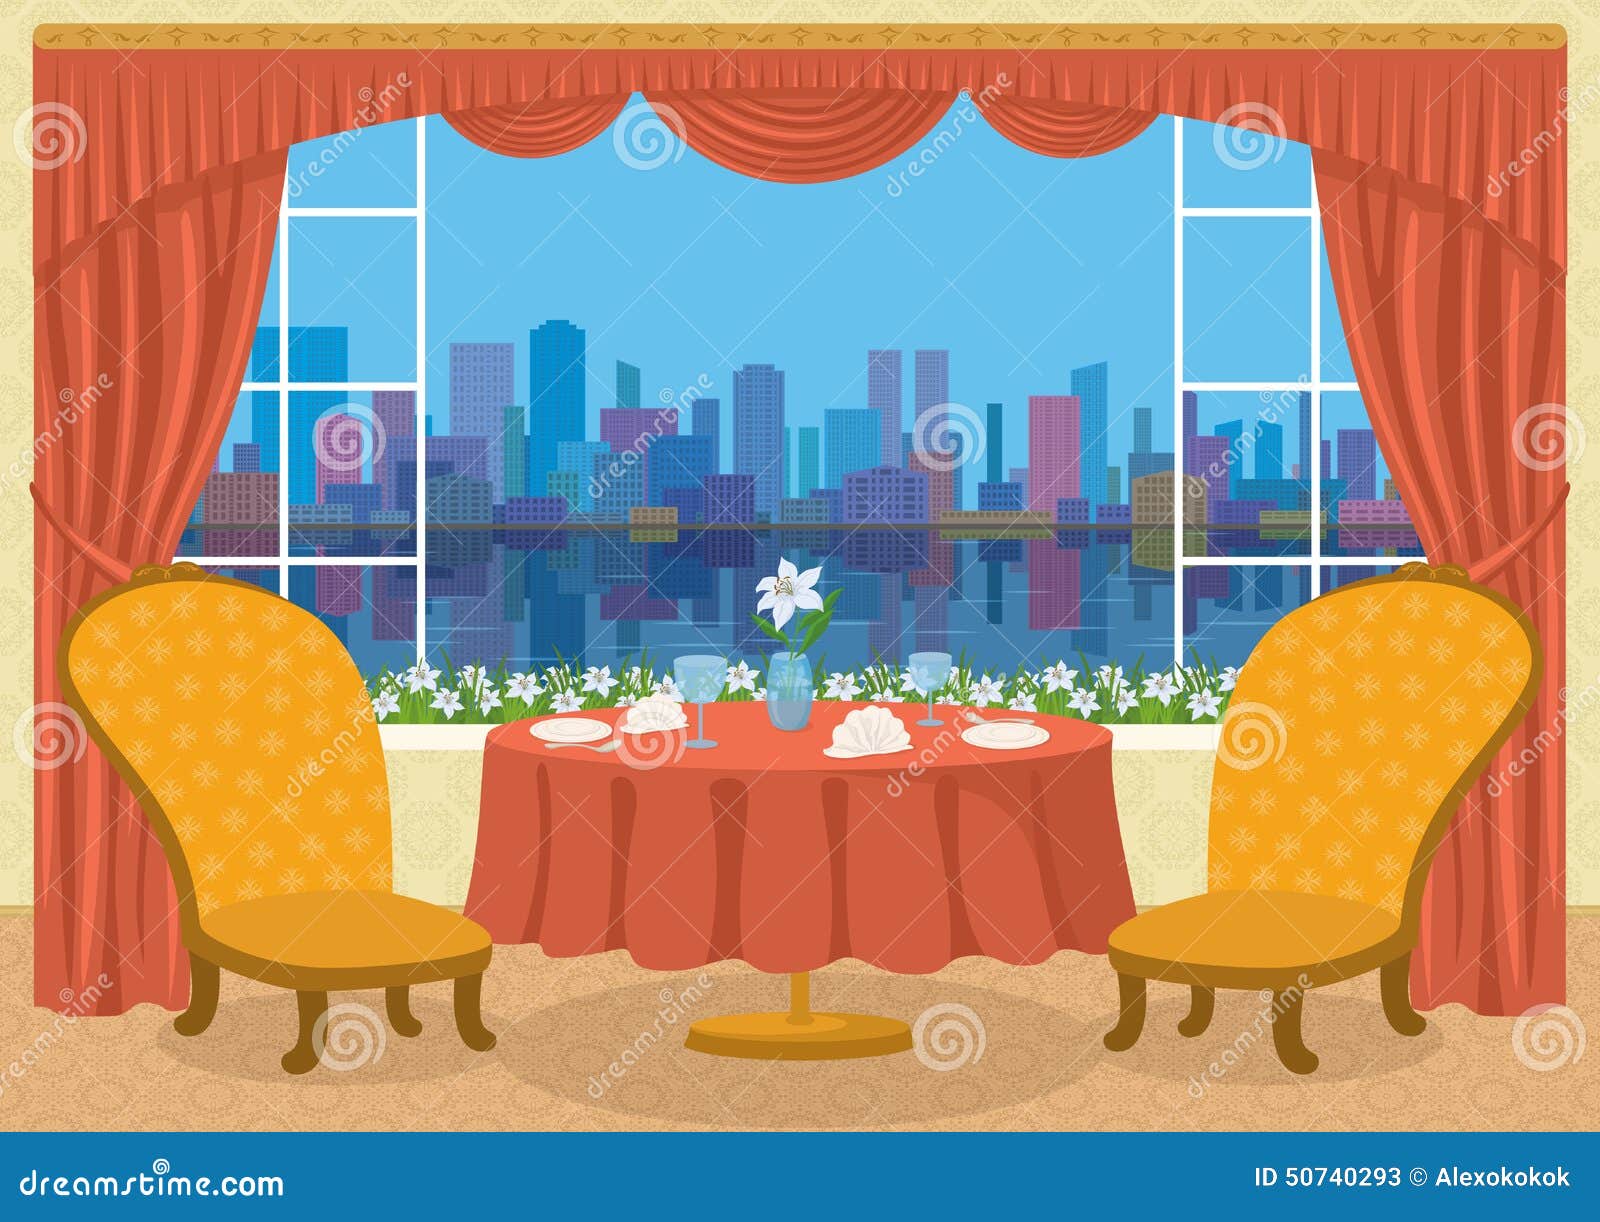 clipart dining out restaurant - photo #48